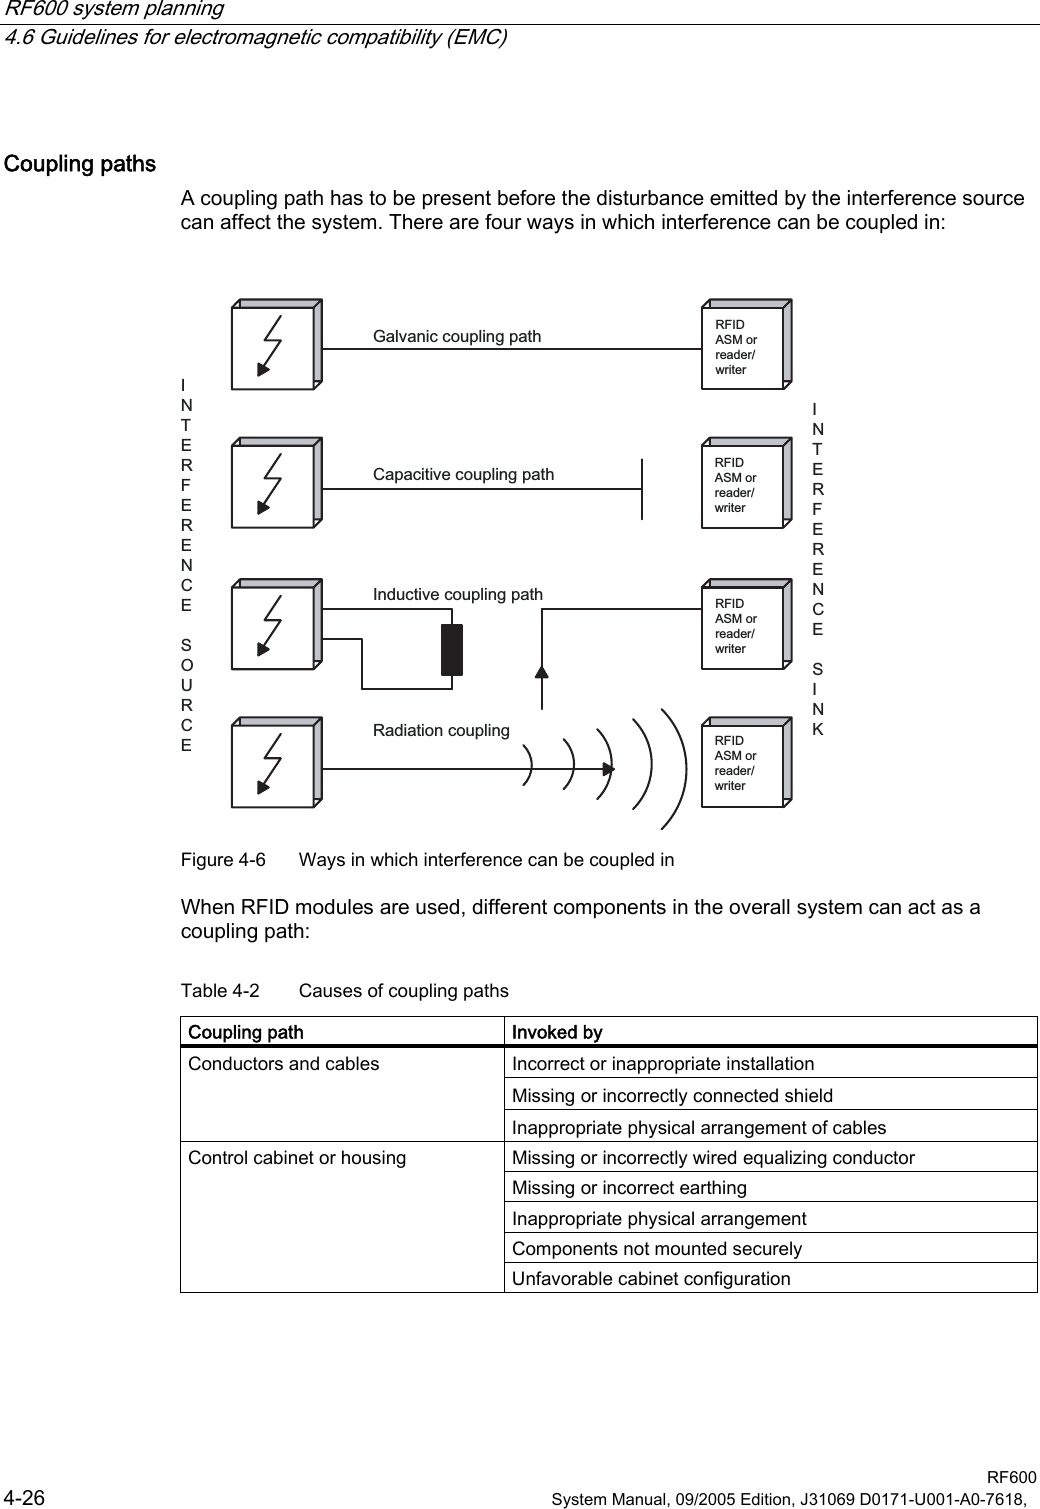 RF600 system planning   4.6 Guidelines for electromagnetic compatibility (EMC)  RF600 4-26  System Manual, 09/2005 Edition, J31069 D0171-U001-A0-7618,   Coupling paths A coupling path has to be present before the disturbance emitted by the interference source can affect the system. There are four ways in which interference can be coupled in:  ,17(5)(5(1&amp;(6,1.,17(5)(5(1&amp;(6285&amp;(*DOYDQLFFRXSOLQJSDWK&amp;DSDFLWLYHFRXSOLQJSDWK,QGXFWLYHFRXSOLQJSDWK5DGLDWLRQFRXSOLQJ5),&apos;$60RUUHDGHUZULWHU5),&apos;$60RUUHDGHUZULWHU5),&apos;$60RUUHDGHUZULWHU5),&apos;$60RUUHDGHUZULWHU Figure 4-6  Ways in which interference can be coupled in When RFID modules are used, different components in the overall system can act as a coupling path: Table 4-2  Causes of coupling paths Coupling path  Invoked by Incorrect or inappropriate installation Missing or incorrectly connected shield Conductors and cables Inappropriate physical arrangement of cables Missing or incorrectly wired equalizing conductor Missing or incorrect earthing Inappropriate physical arrangement Components not mounted securely Control cabinet or housing Unfavorable cabinet configuration  